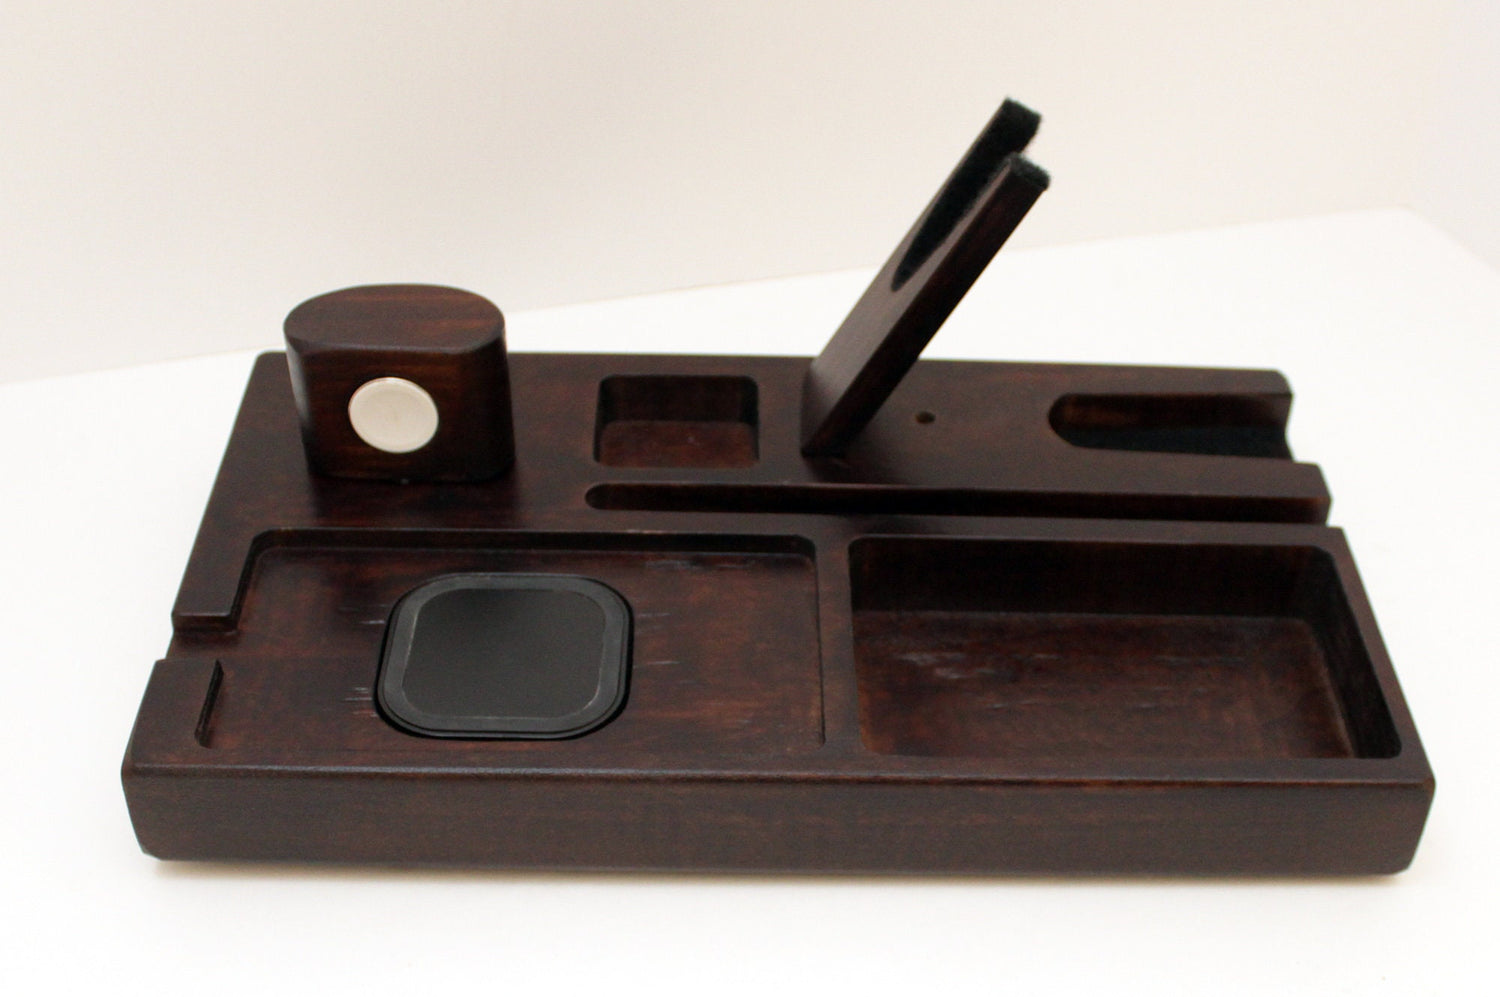 Personalized Gift ,  Gift Idea, EDC VALET tray, Charging Station with Qi charger  Standout EDC   